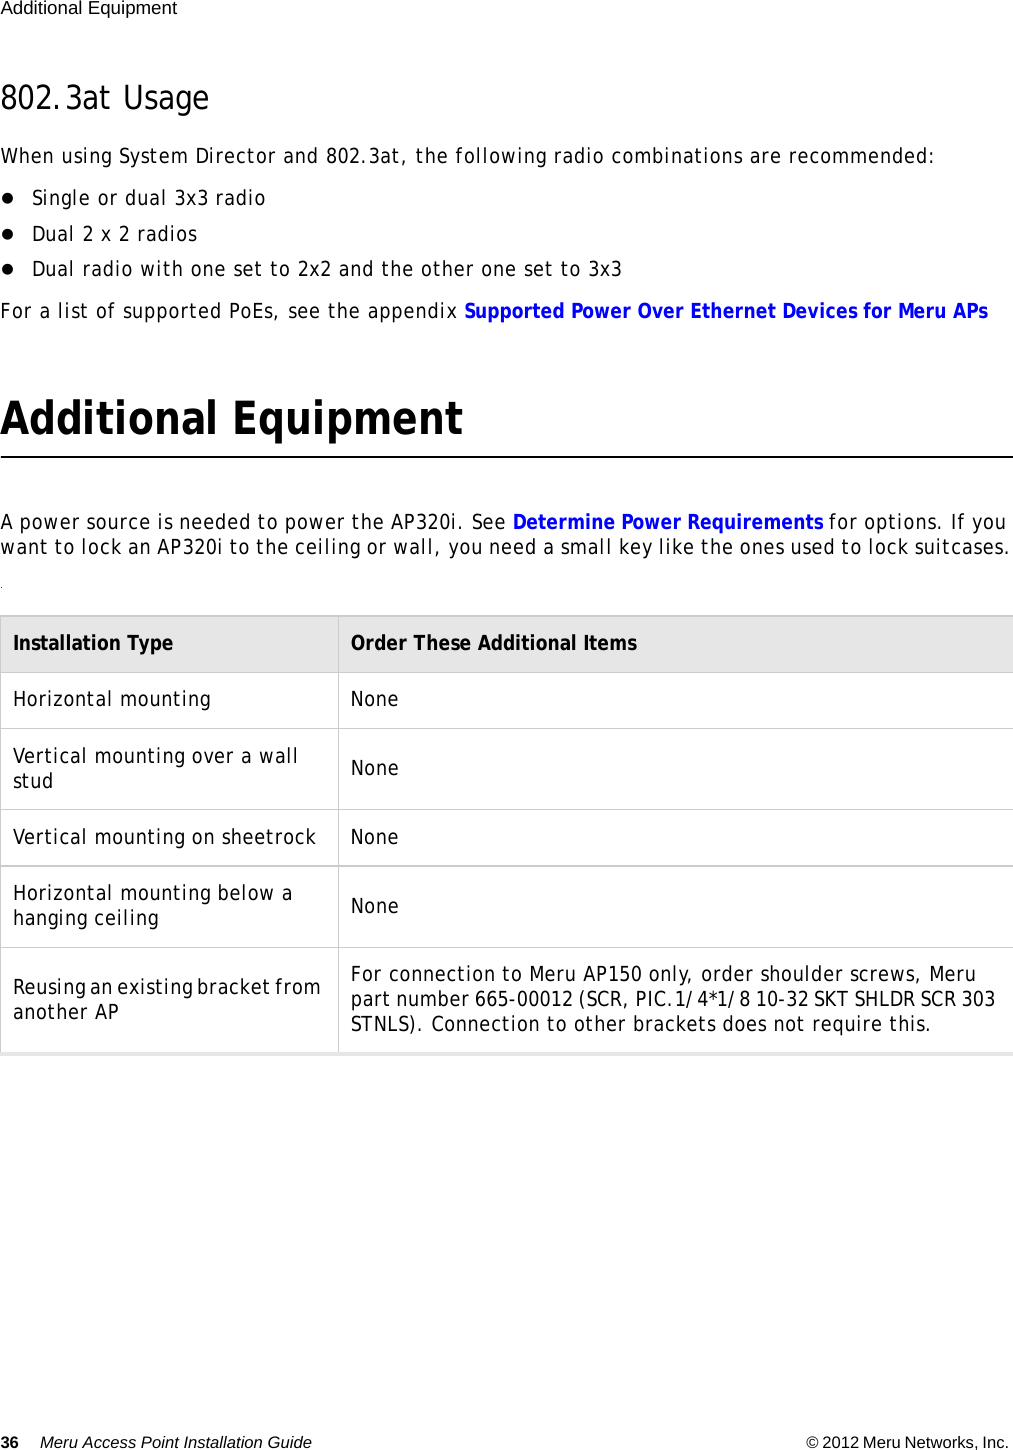 36 Meru Access Point Installation Guide © 2012 Meru Networks, Inc. Additional Equipment 802.3at UsageWhen using System Director and 802.3at, the following radio combinations are recommended:Single or dual 3x3 radioDual 2 x 2 radios Dual radio with one set to 2x2 and the other one set to 3x3 For a list of supported PoEs, see the appendix Supported Power Over Ethernet Devices for Meru APsAdditional EquipmentA power source is needed to power the AP320i. See Determine Power Requirements for options. If you want to lock an AP320i to the ceiling or wall, you need a small key like the ones used to lock suitcases..Installation Type Order These Additional Items Horizontal mounting NoneVertical mounting over a wall stud None Vertical mounting on sheetrock NoneHorizontal mounting below a hanging ceiling NoneReusing an existing bracket from another APFor connection to Meru AP150 only, order shoulder screws, Meru part number 665-00012 (SCR, PIC.1/4*1/8 10-32 SKT SHLDR SCR 303 STNLS). Connection to other brackets does not require this.